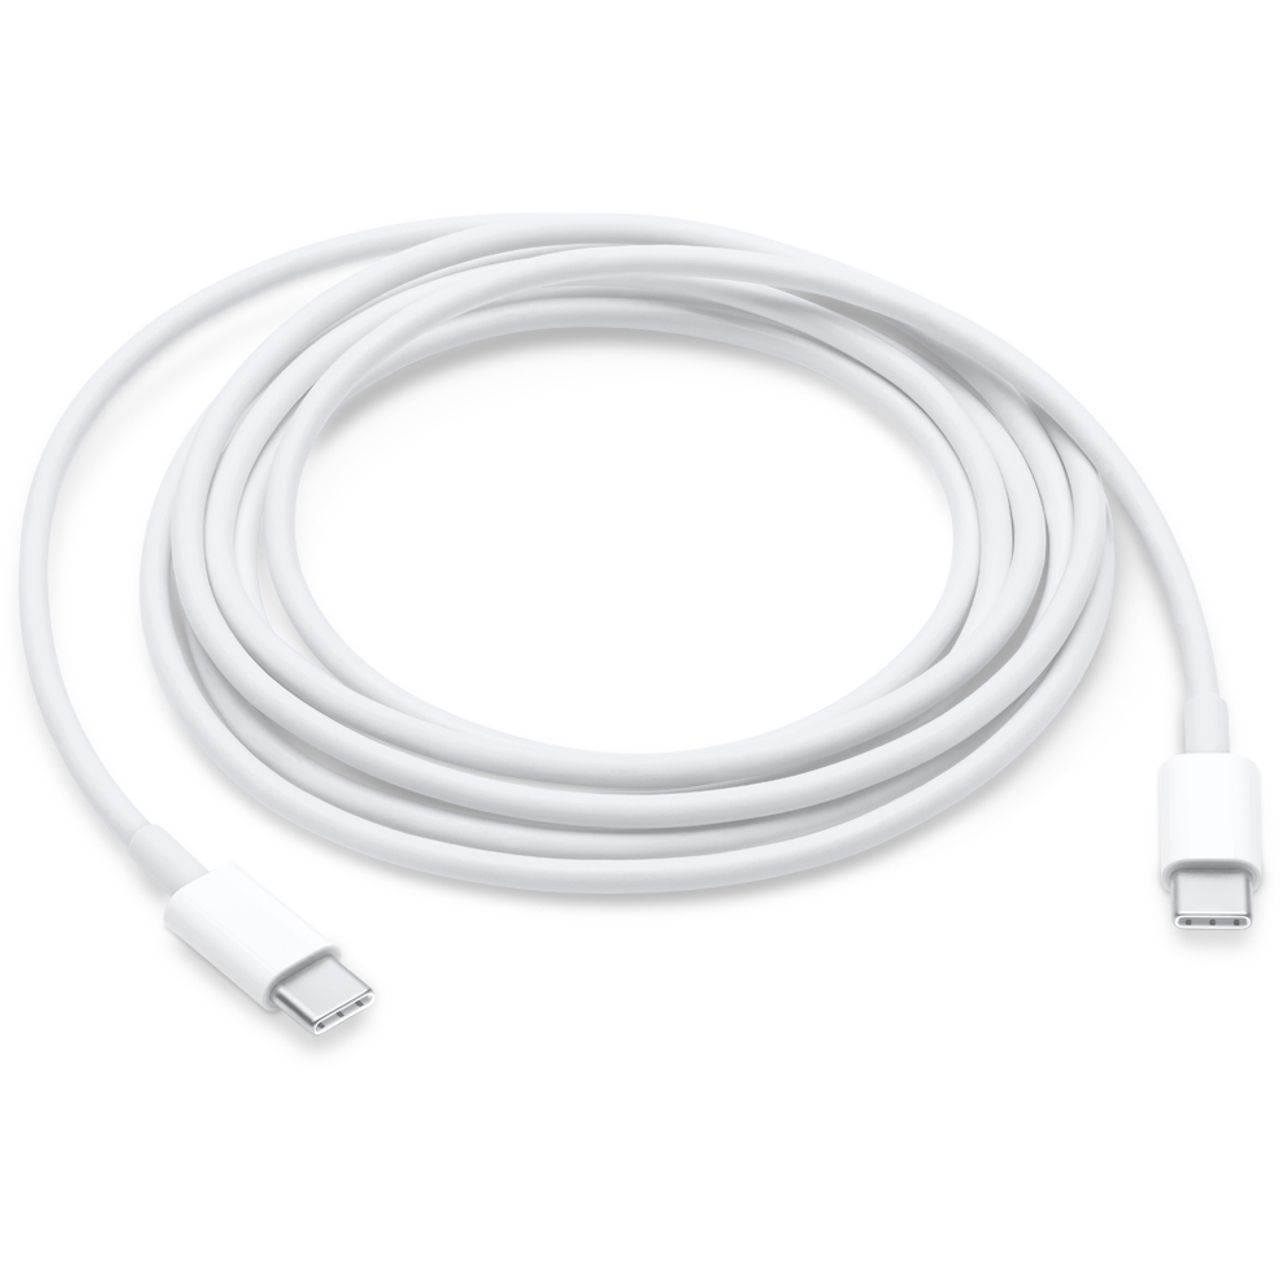 Apple USB-C Charge Cable (2m) Review